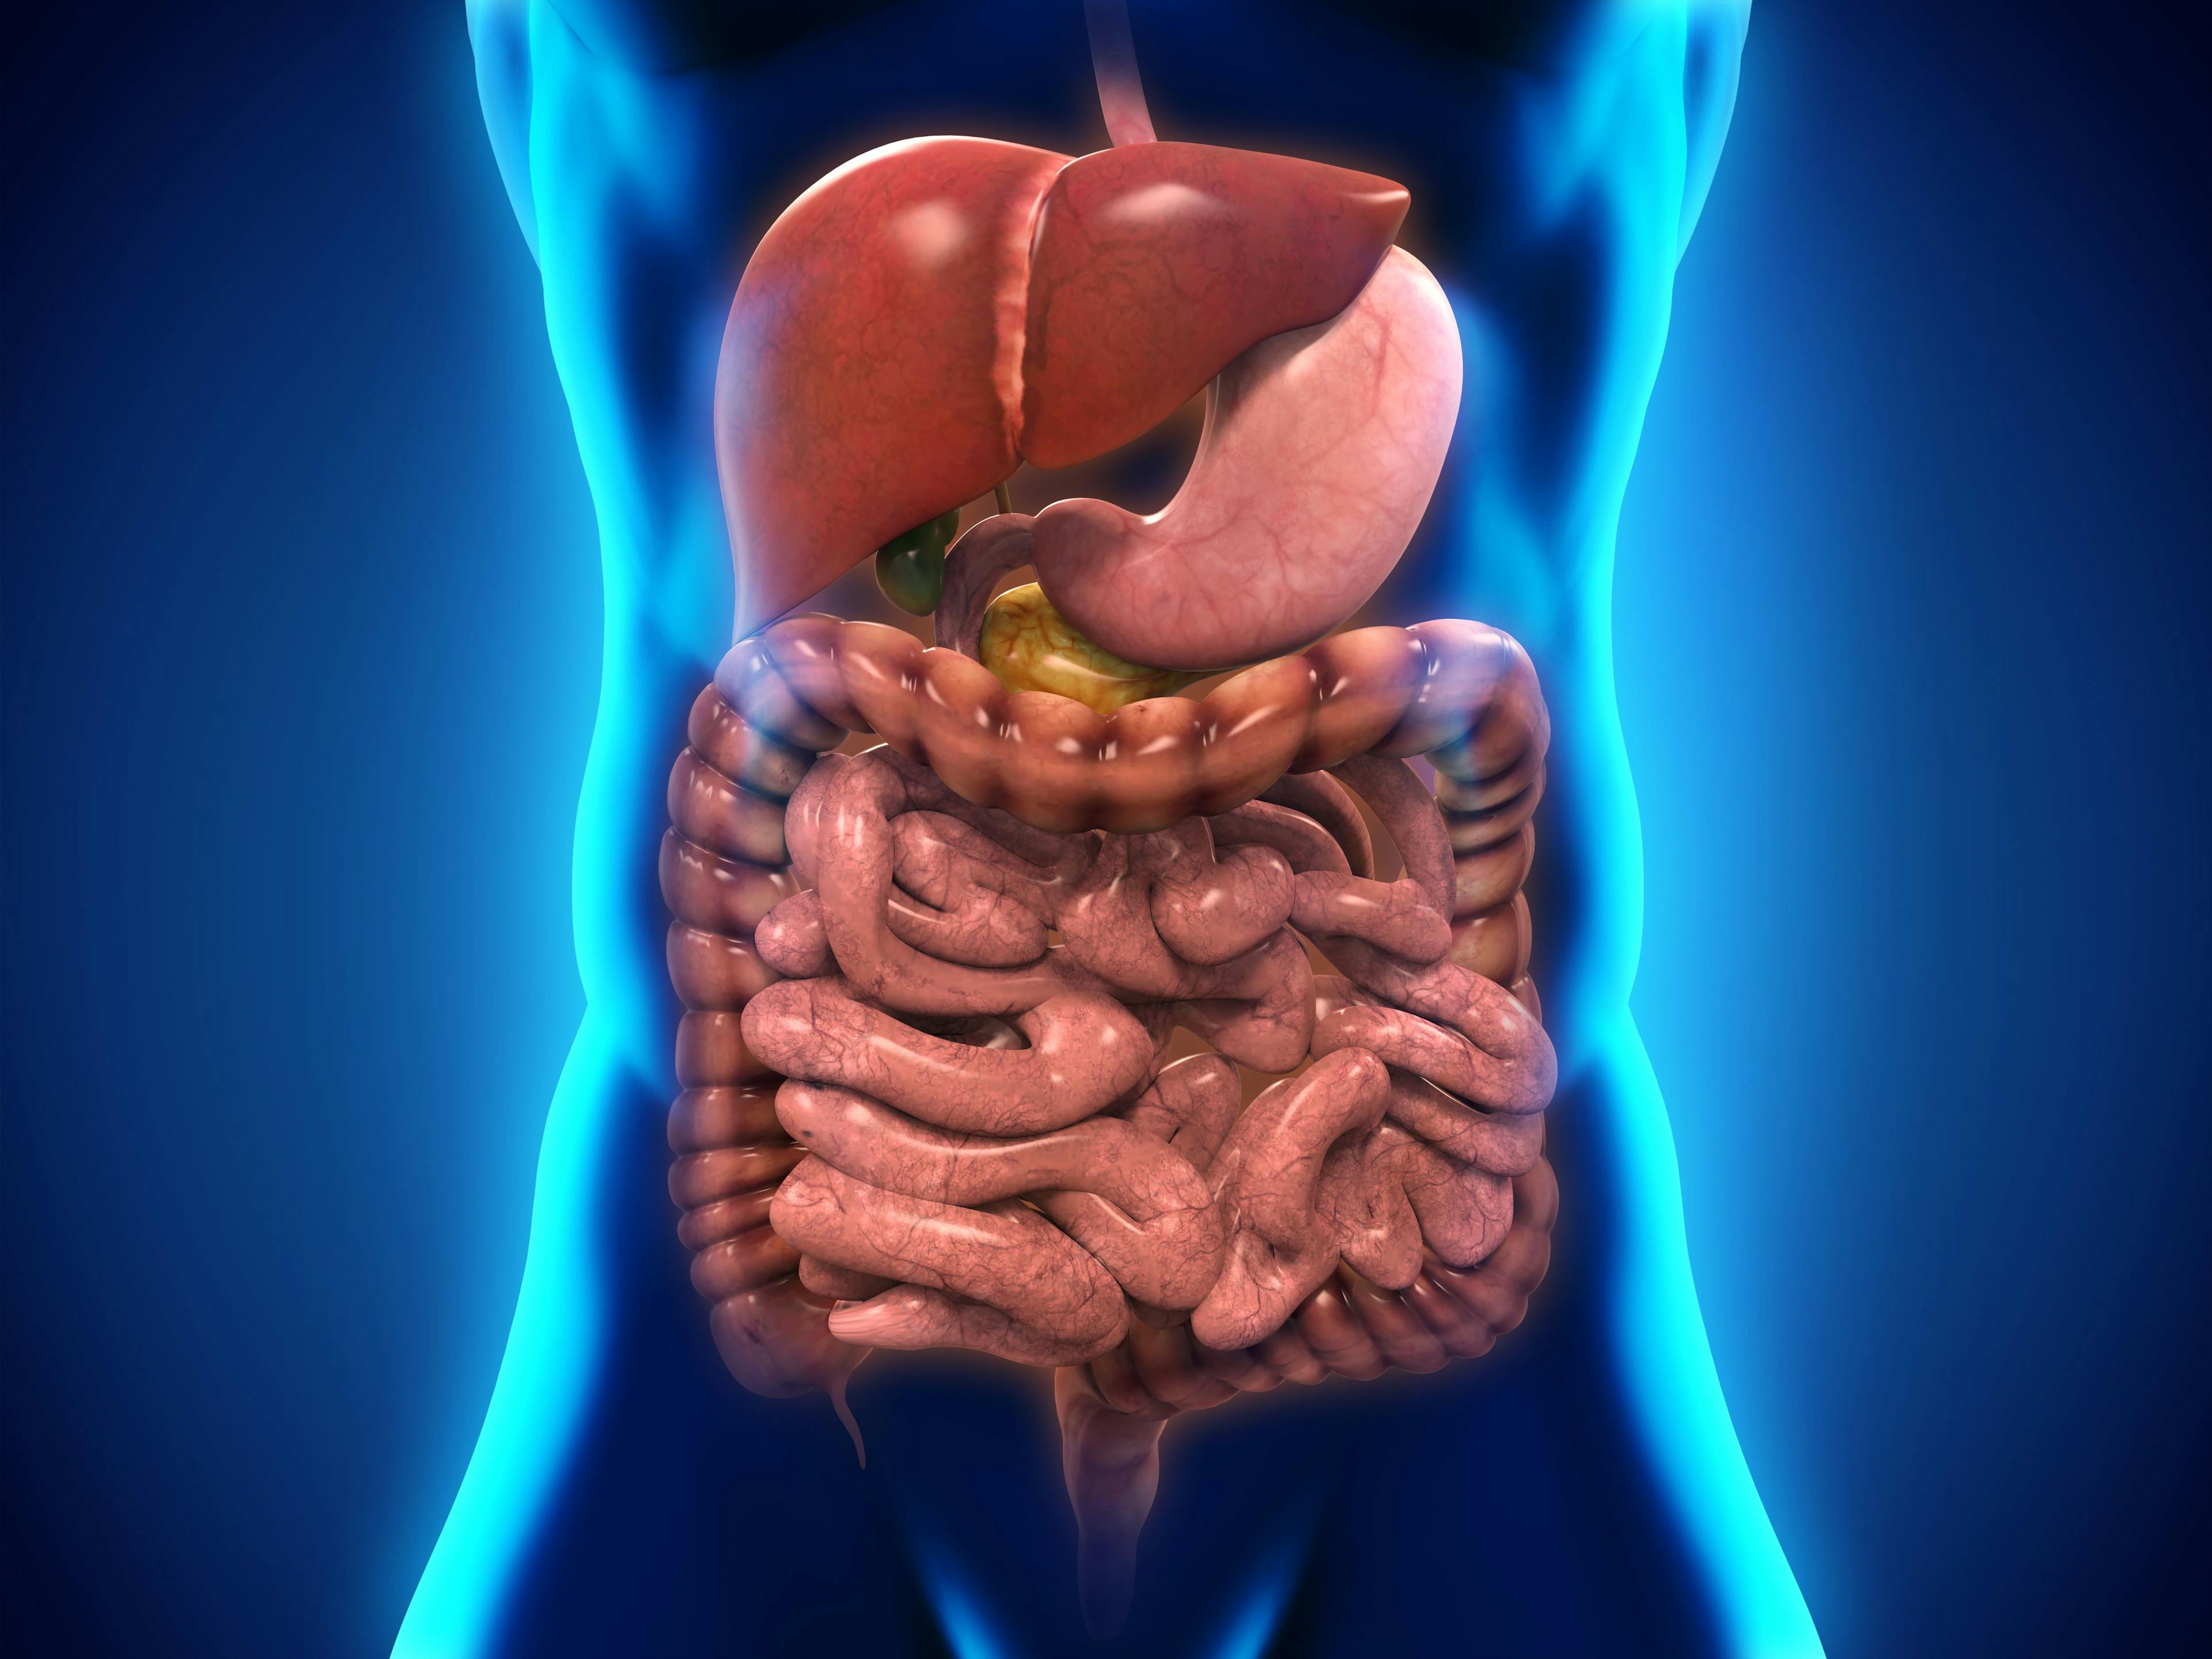 CYNK-101 plus standard frontline chemotherapy, trastuzumab, and pembrolizumab has received a fast track designation from the FDA for patients with advanced HER2-positive gastric or gastroesophageal junction adenocarcinoma.